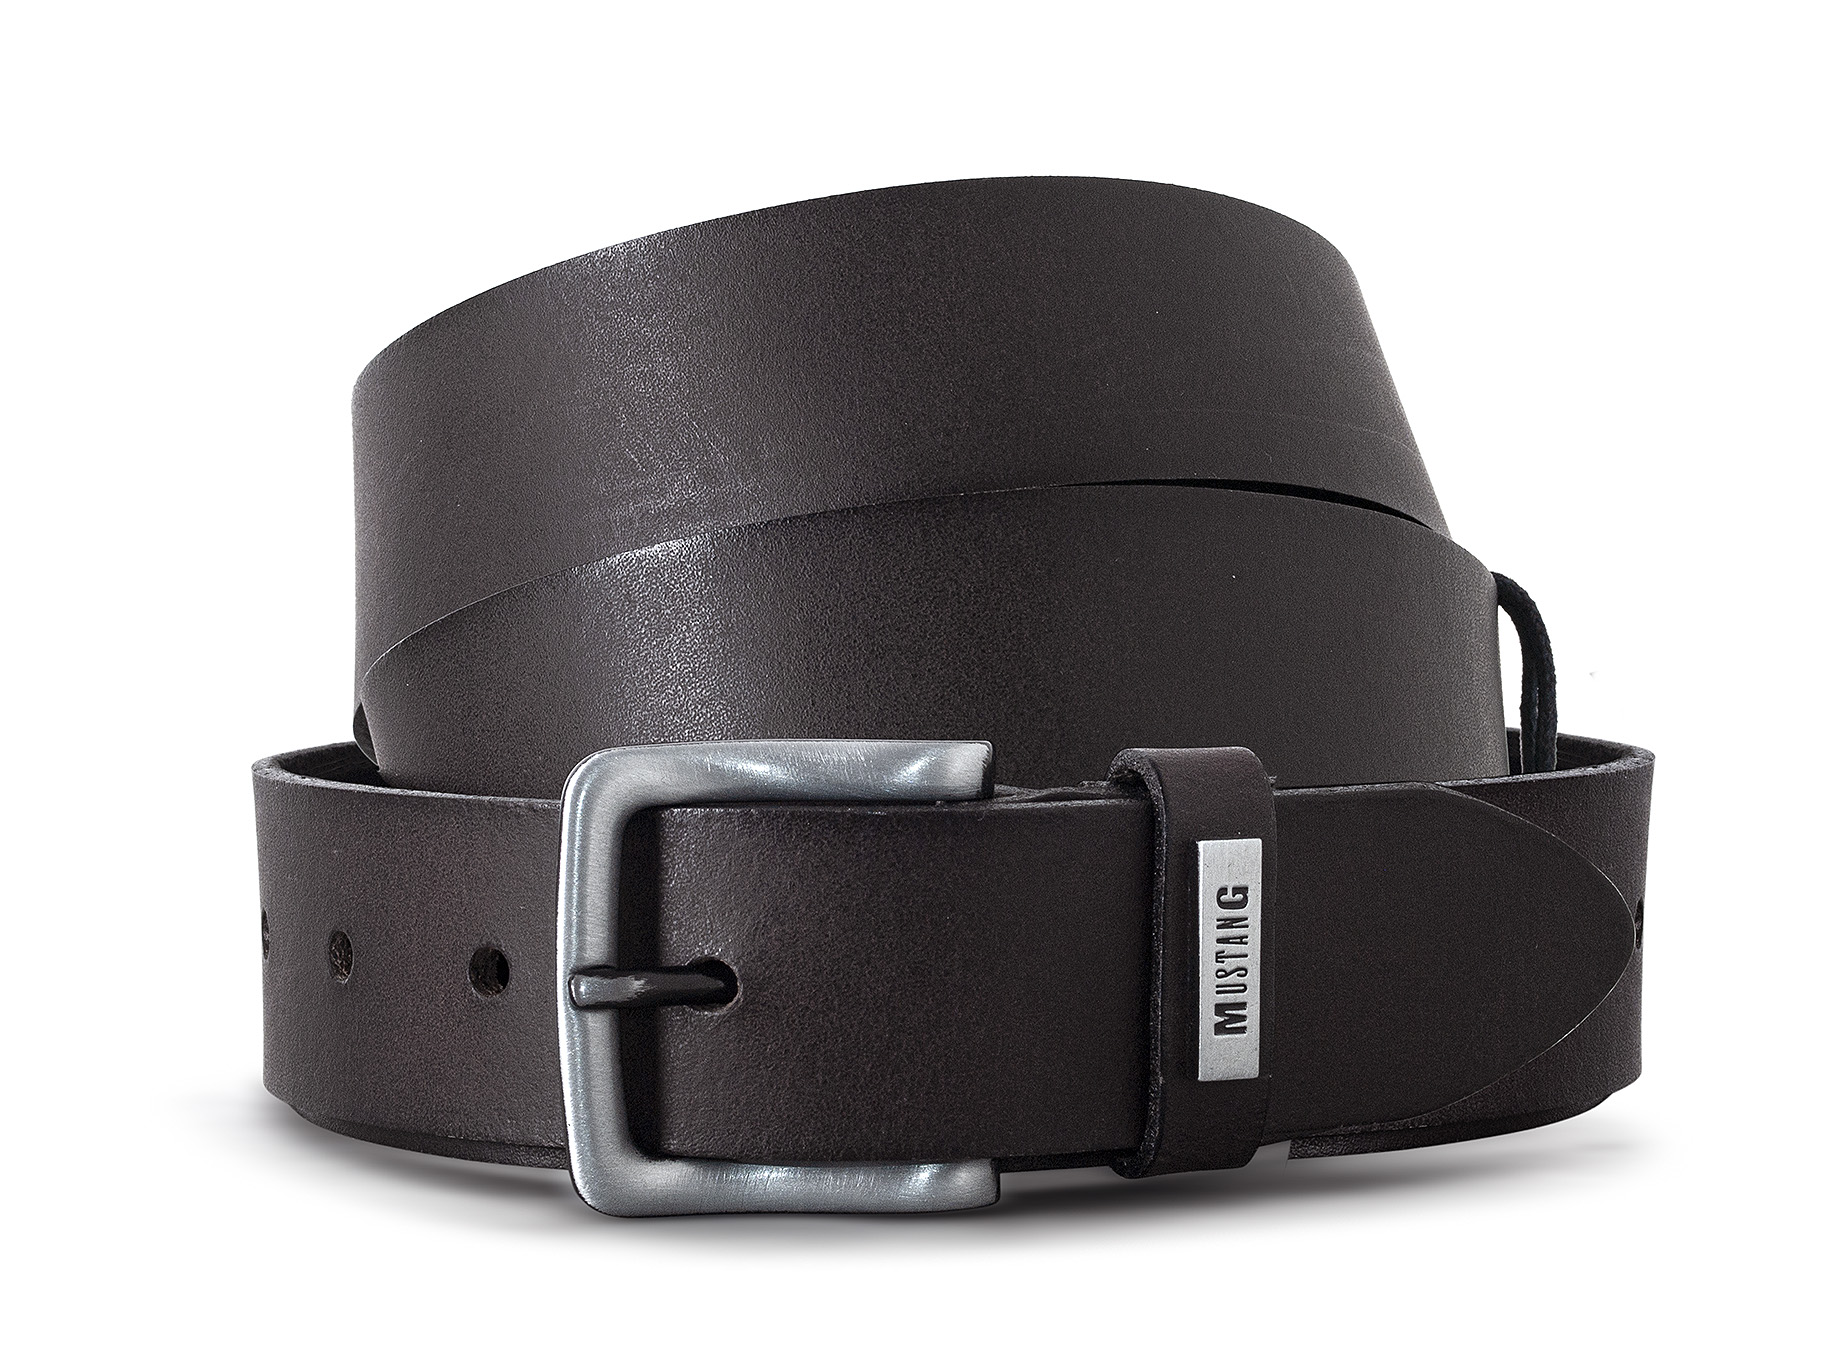 Mustang belt MG2101L01-691 leather mens